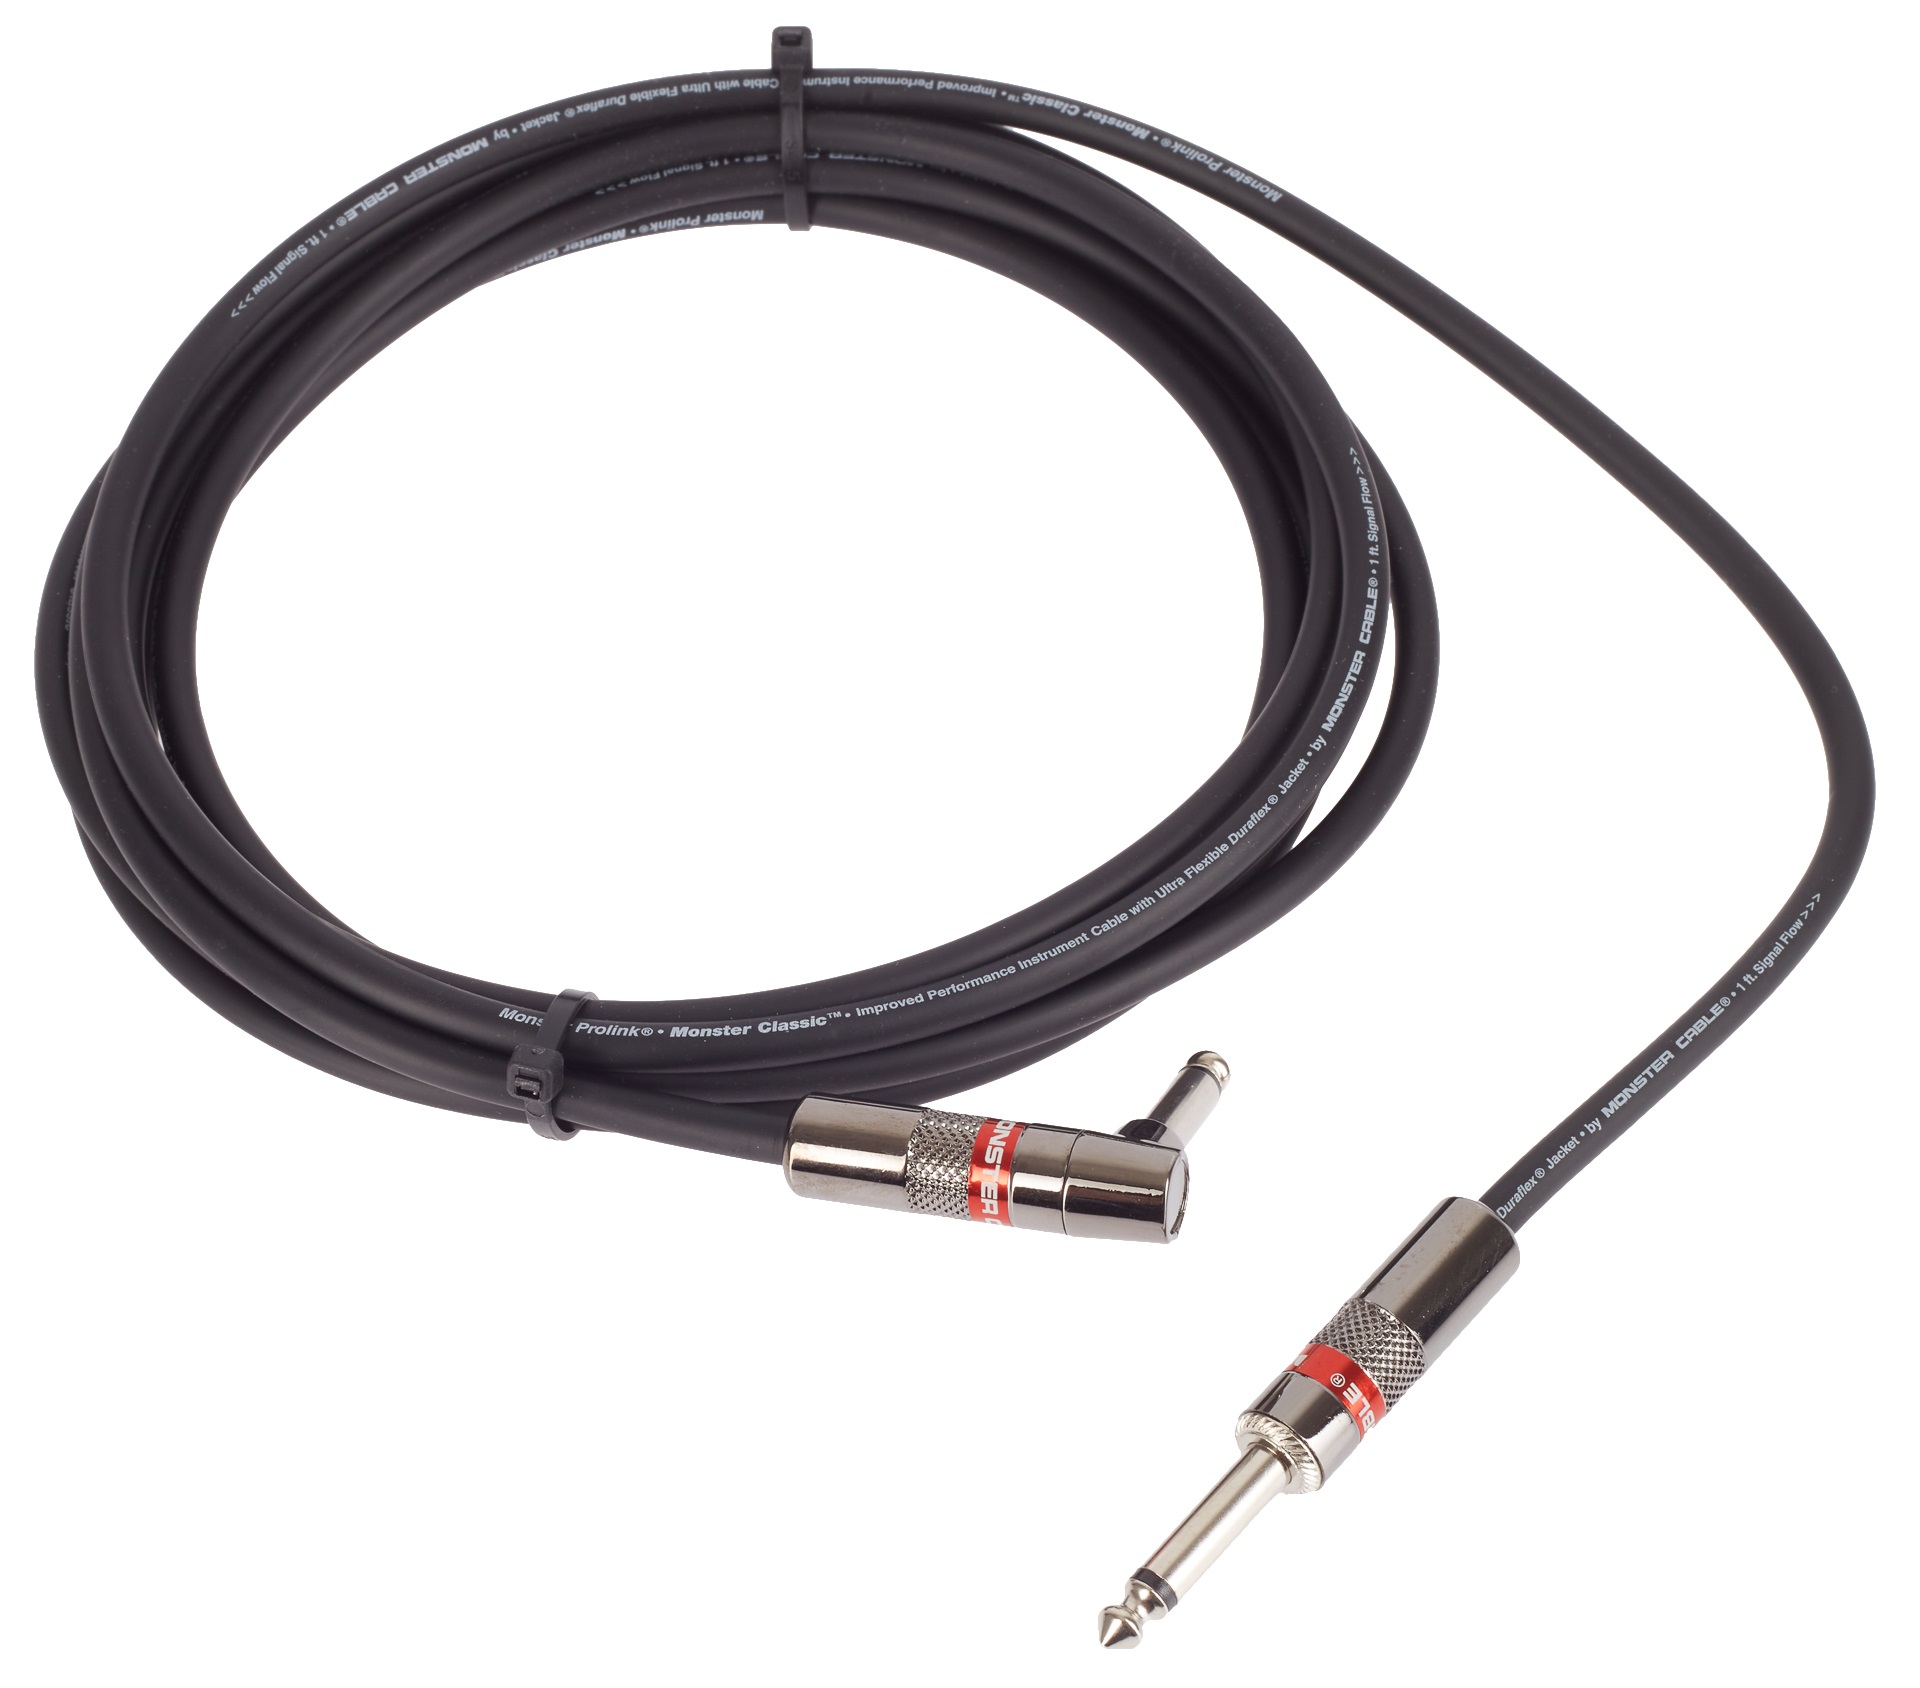 Monster Classic 12' Instrument Cable Angled